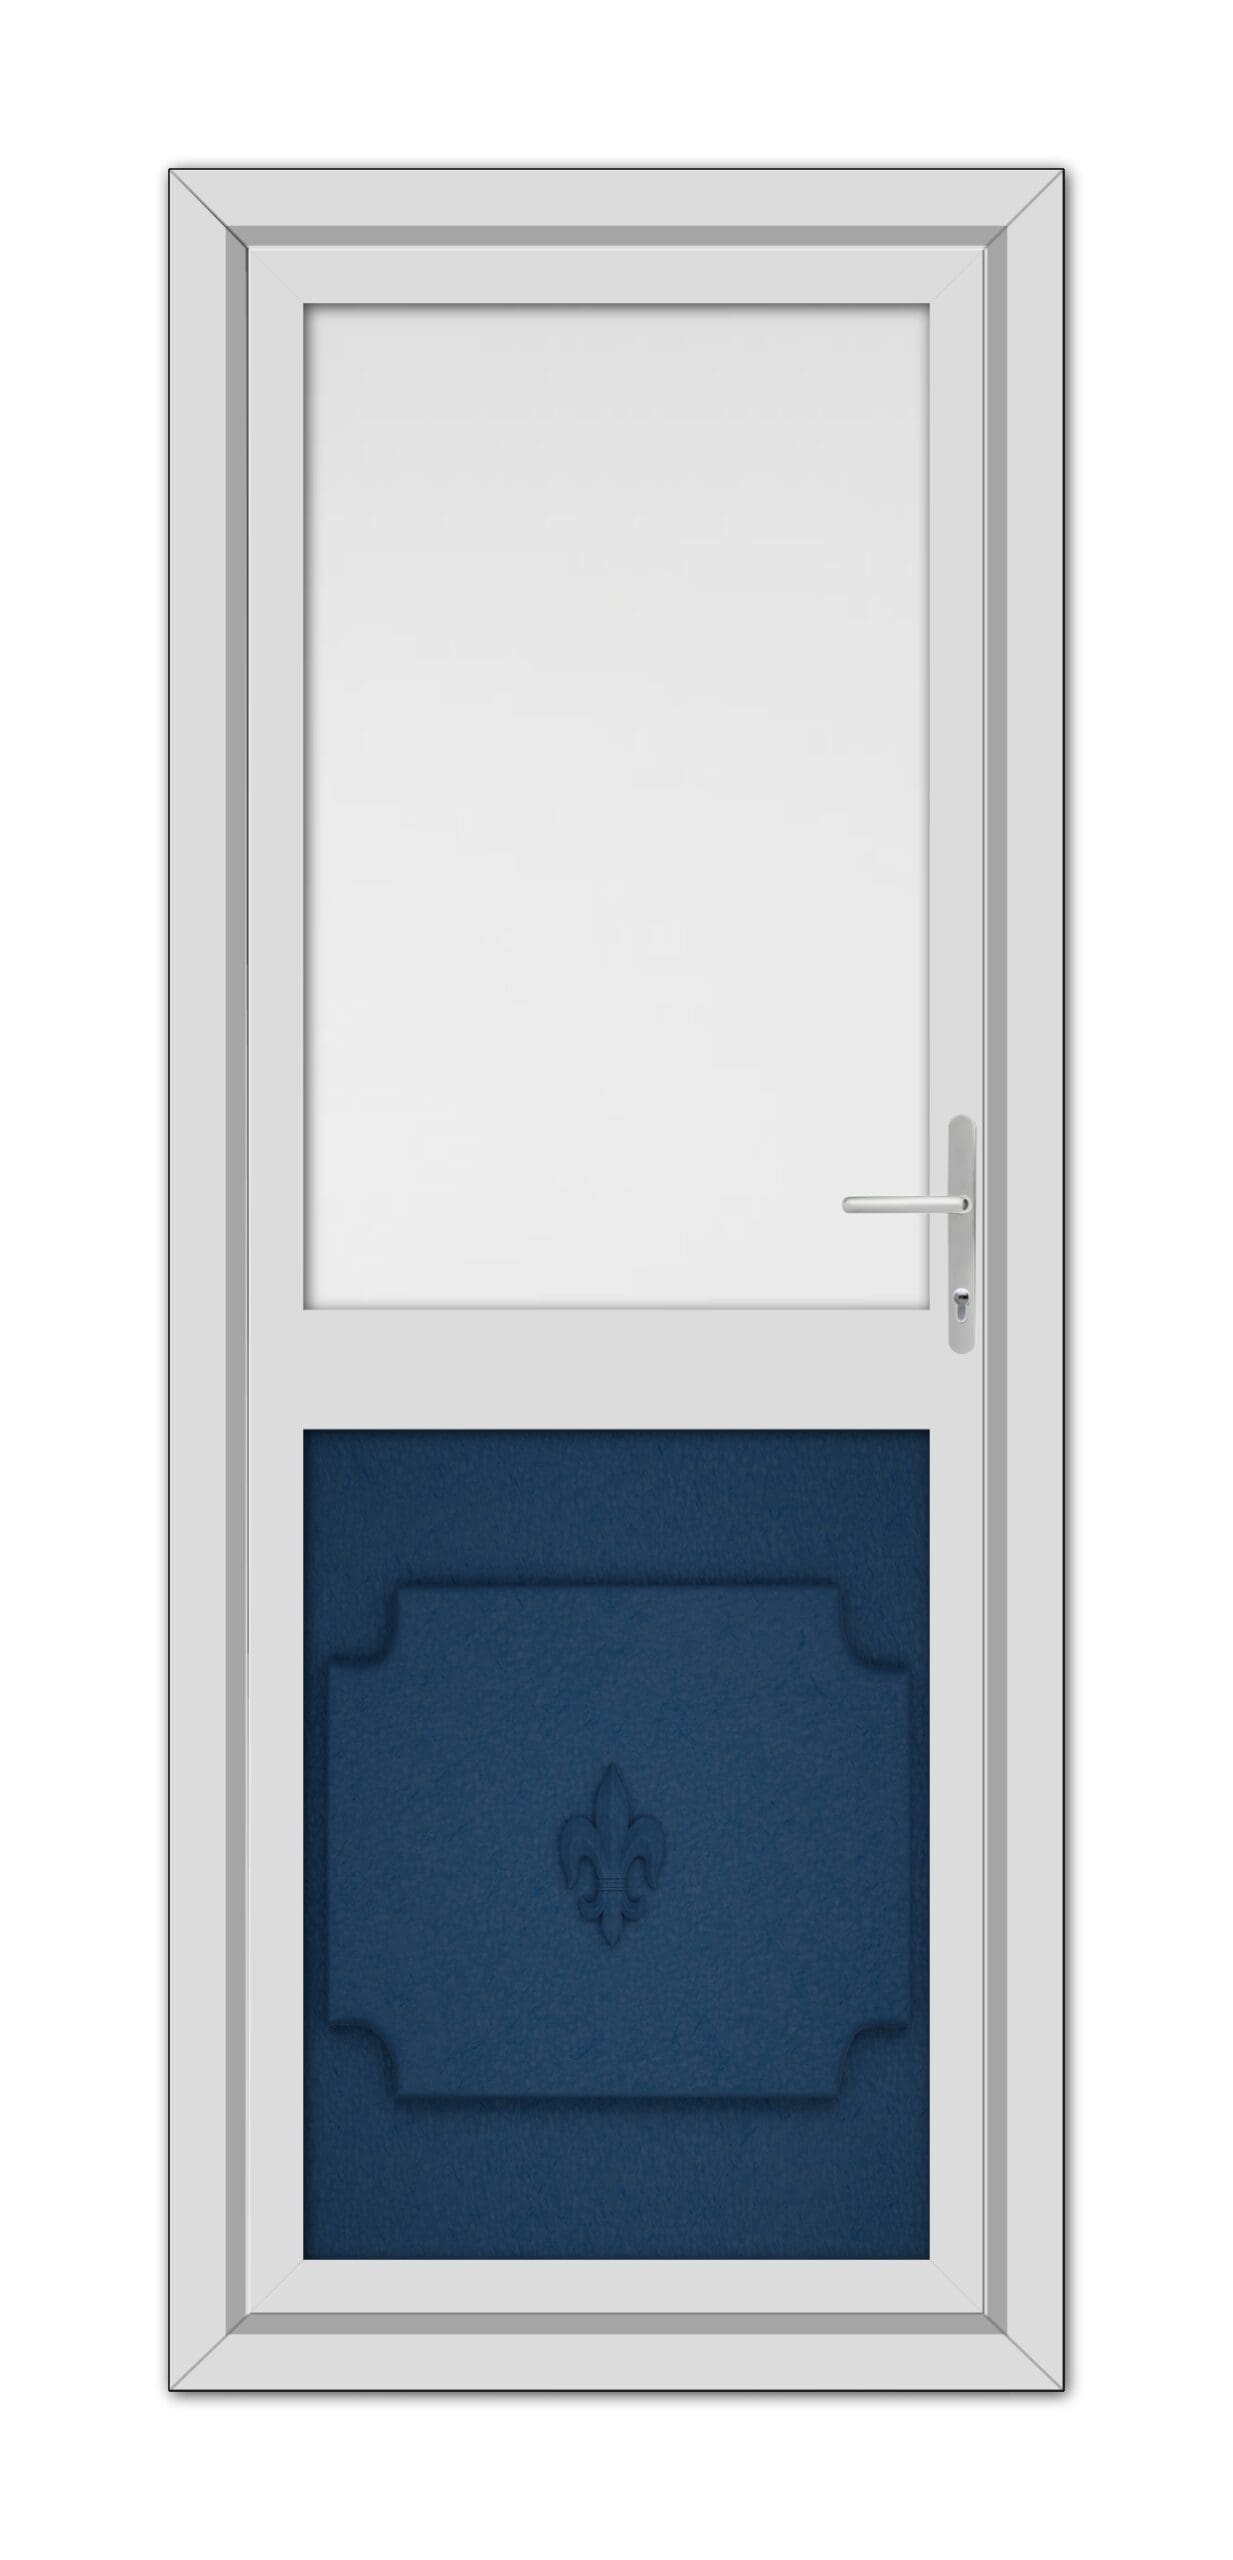 A closed modern window with a white frame, featuring a lower Blue Abbey Half uPVC Back Door panel with a decorative fleur-de-lis symbol.